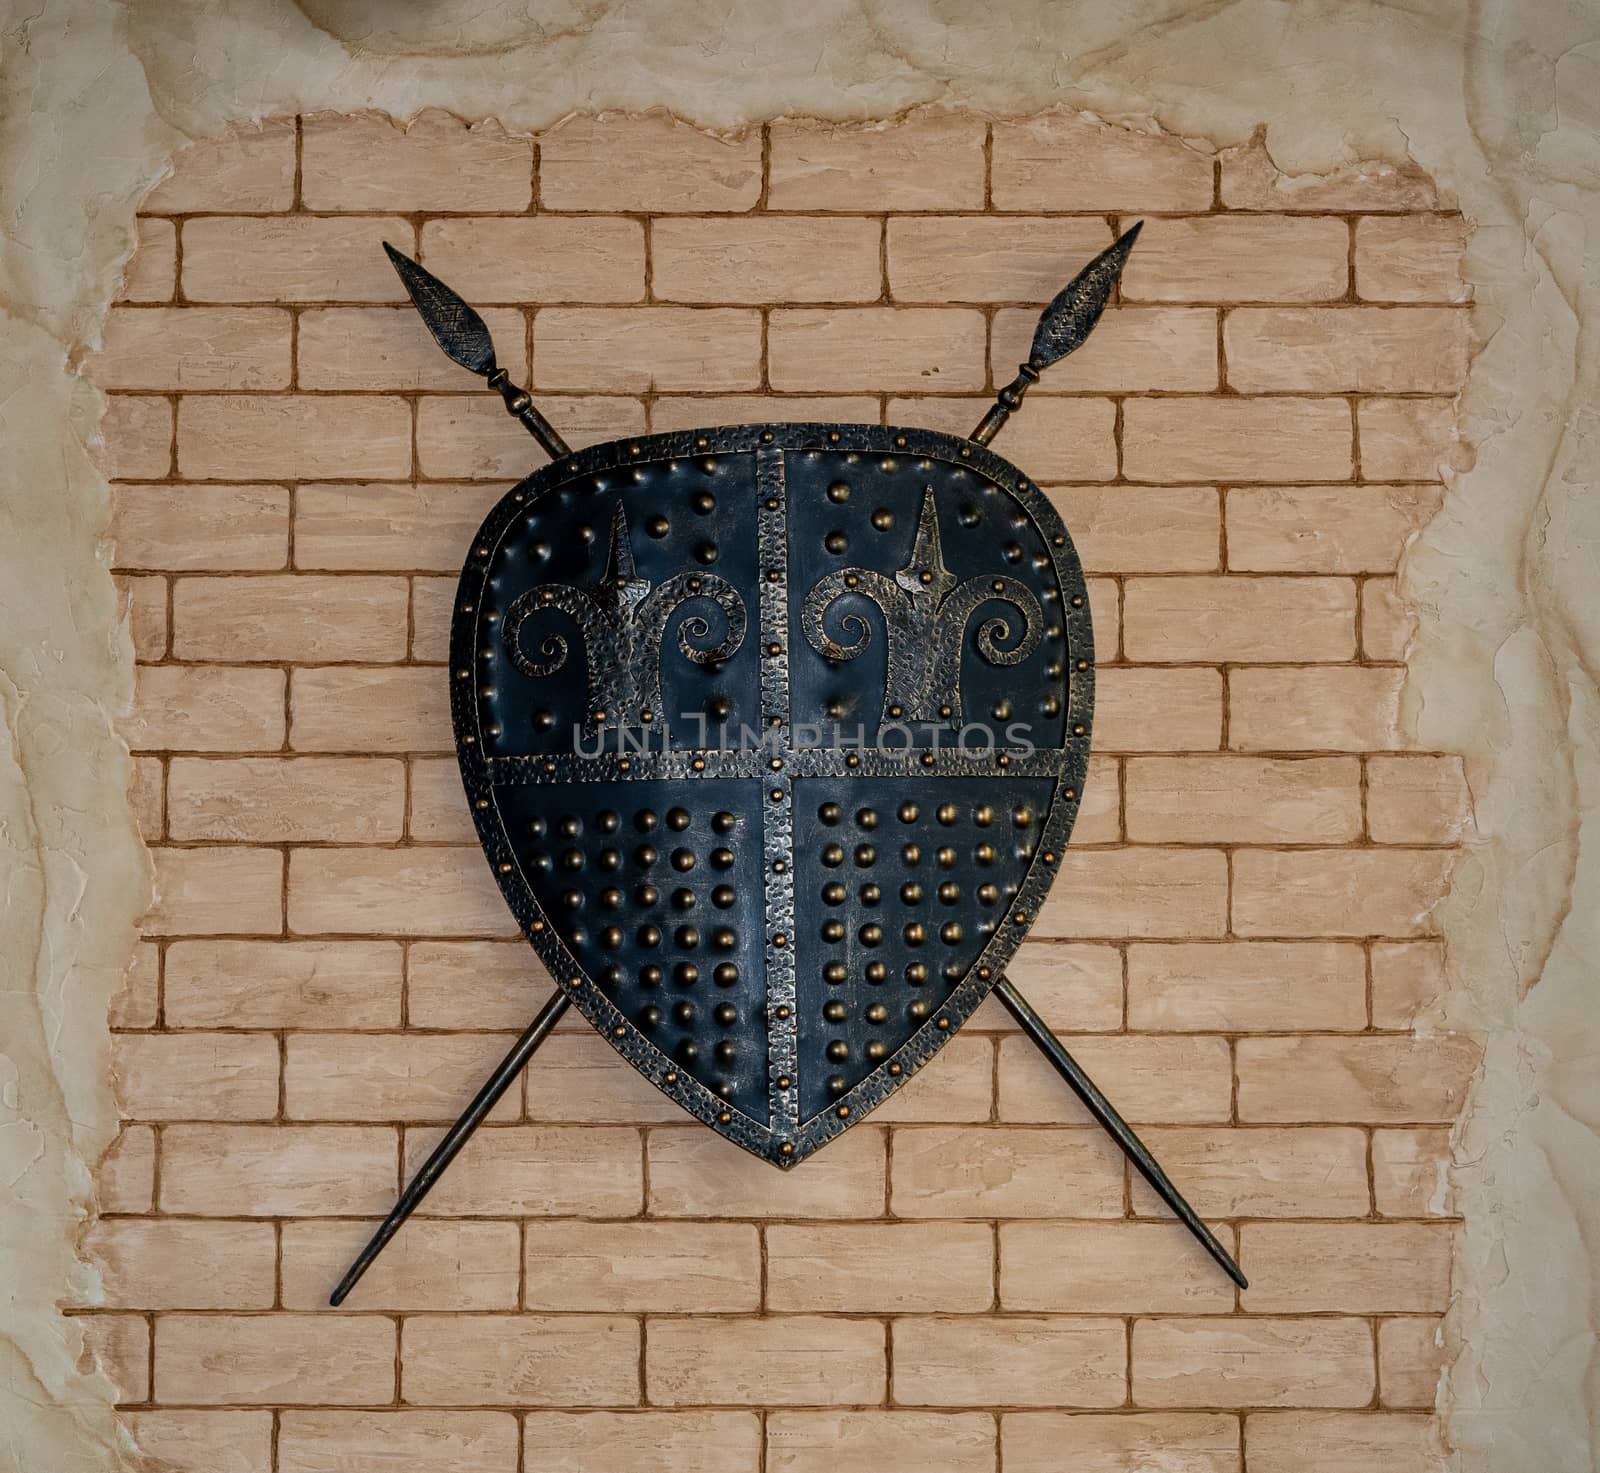 Design of an ancient castle. Brick wall. Shield and spears on the wall. Ancient style. by Serhii_Voroshchuk